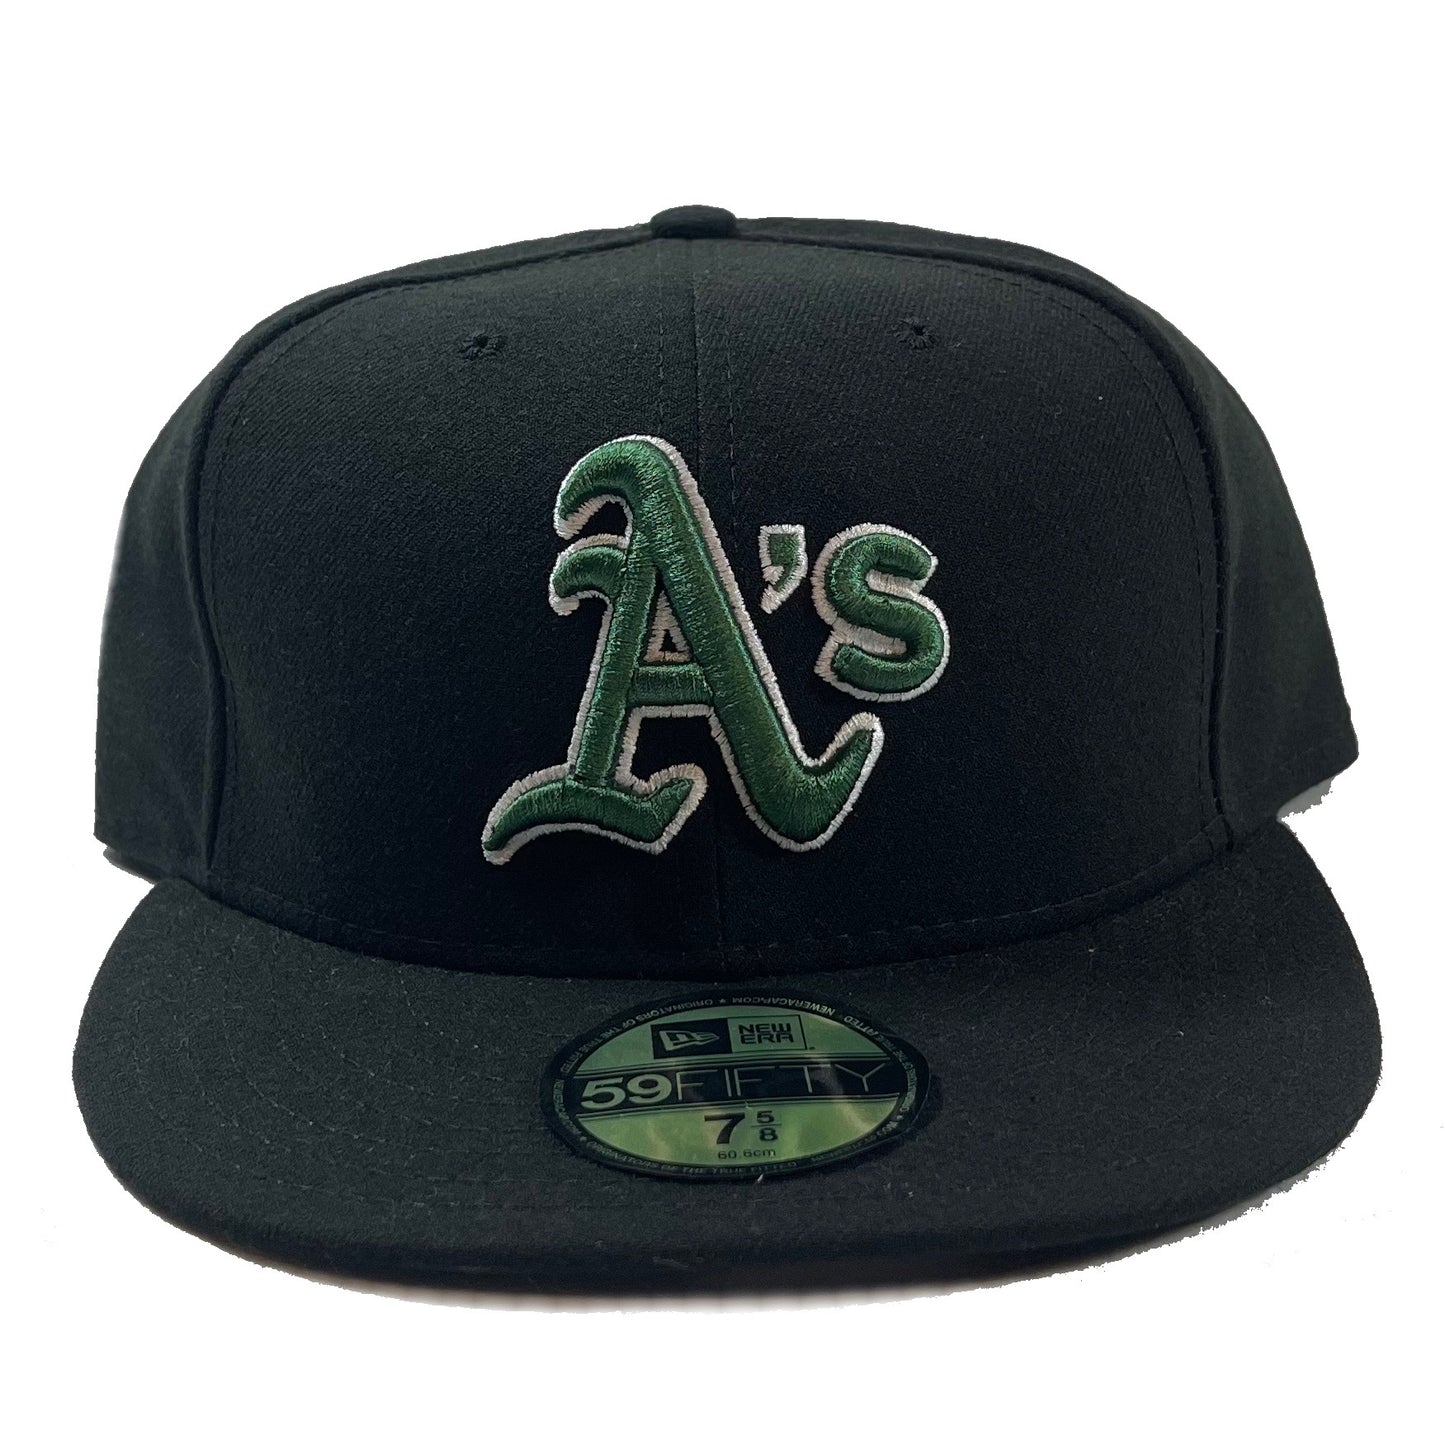 Oakland Athletic's (Black) Fitted